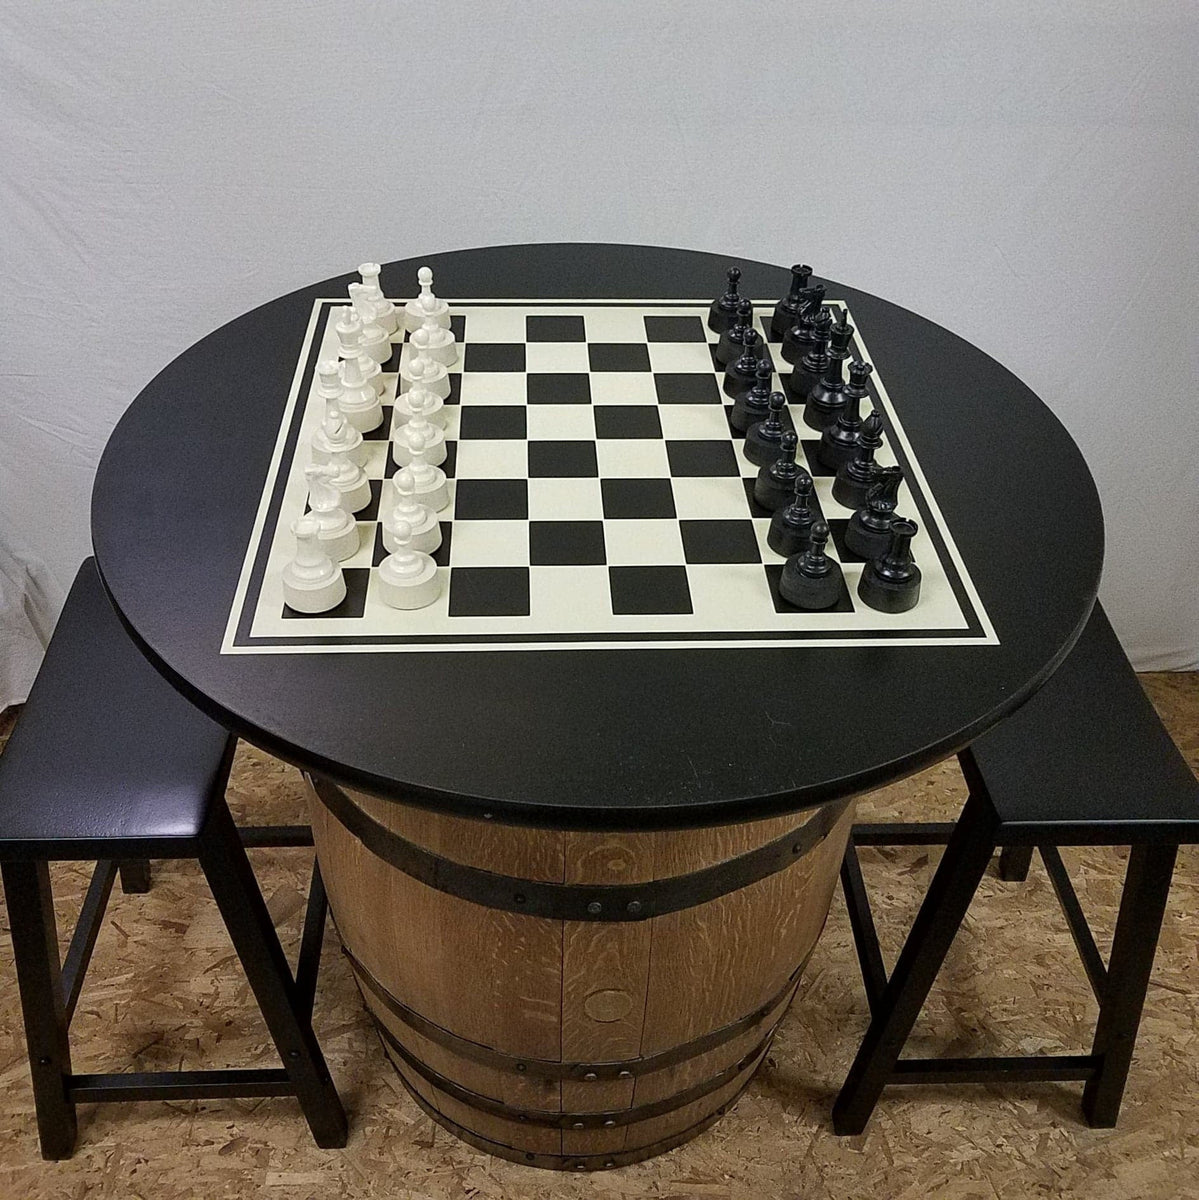 1946 a Kentucky Tavern Unique Chess Board Whiskey "Check and